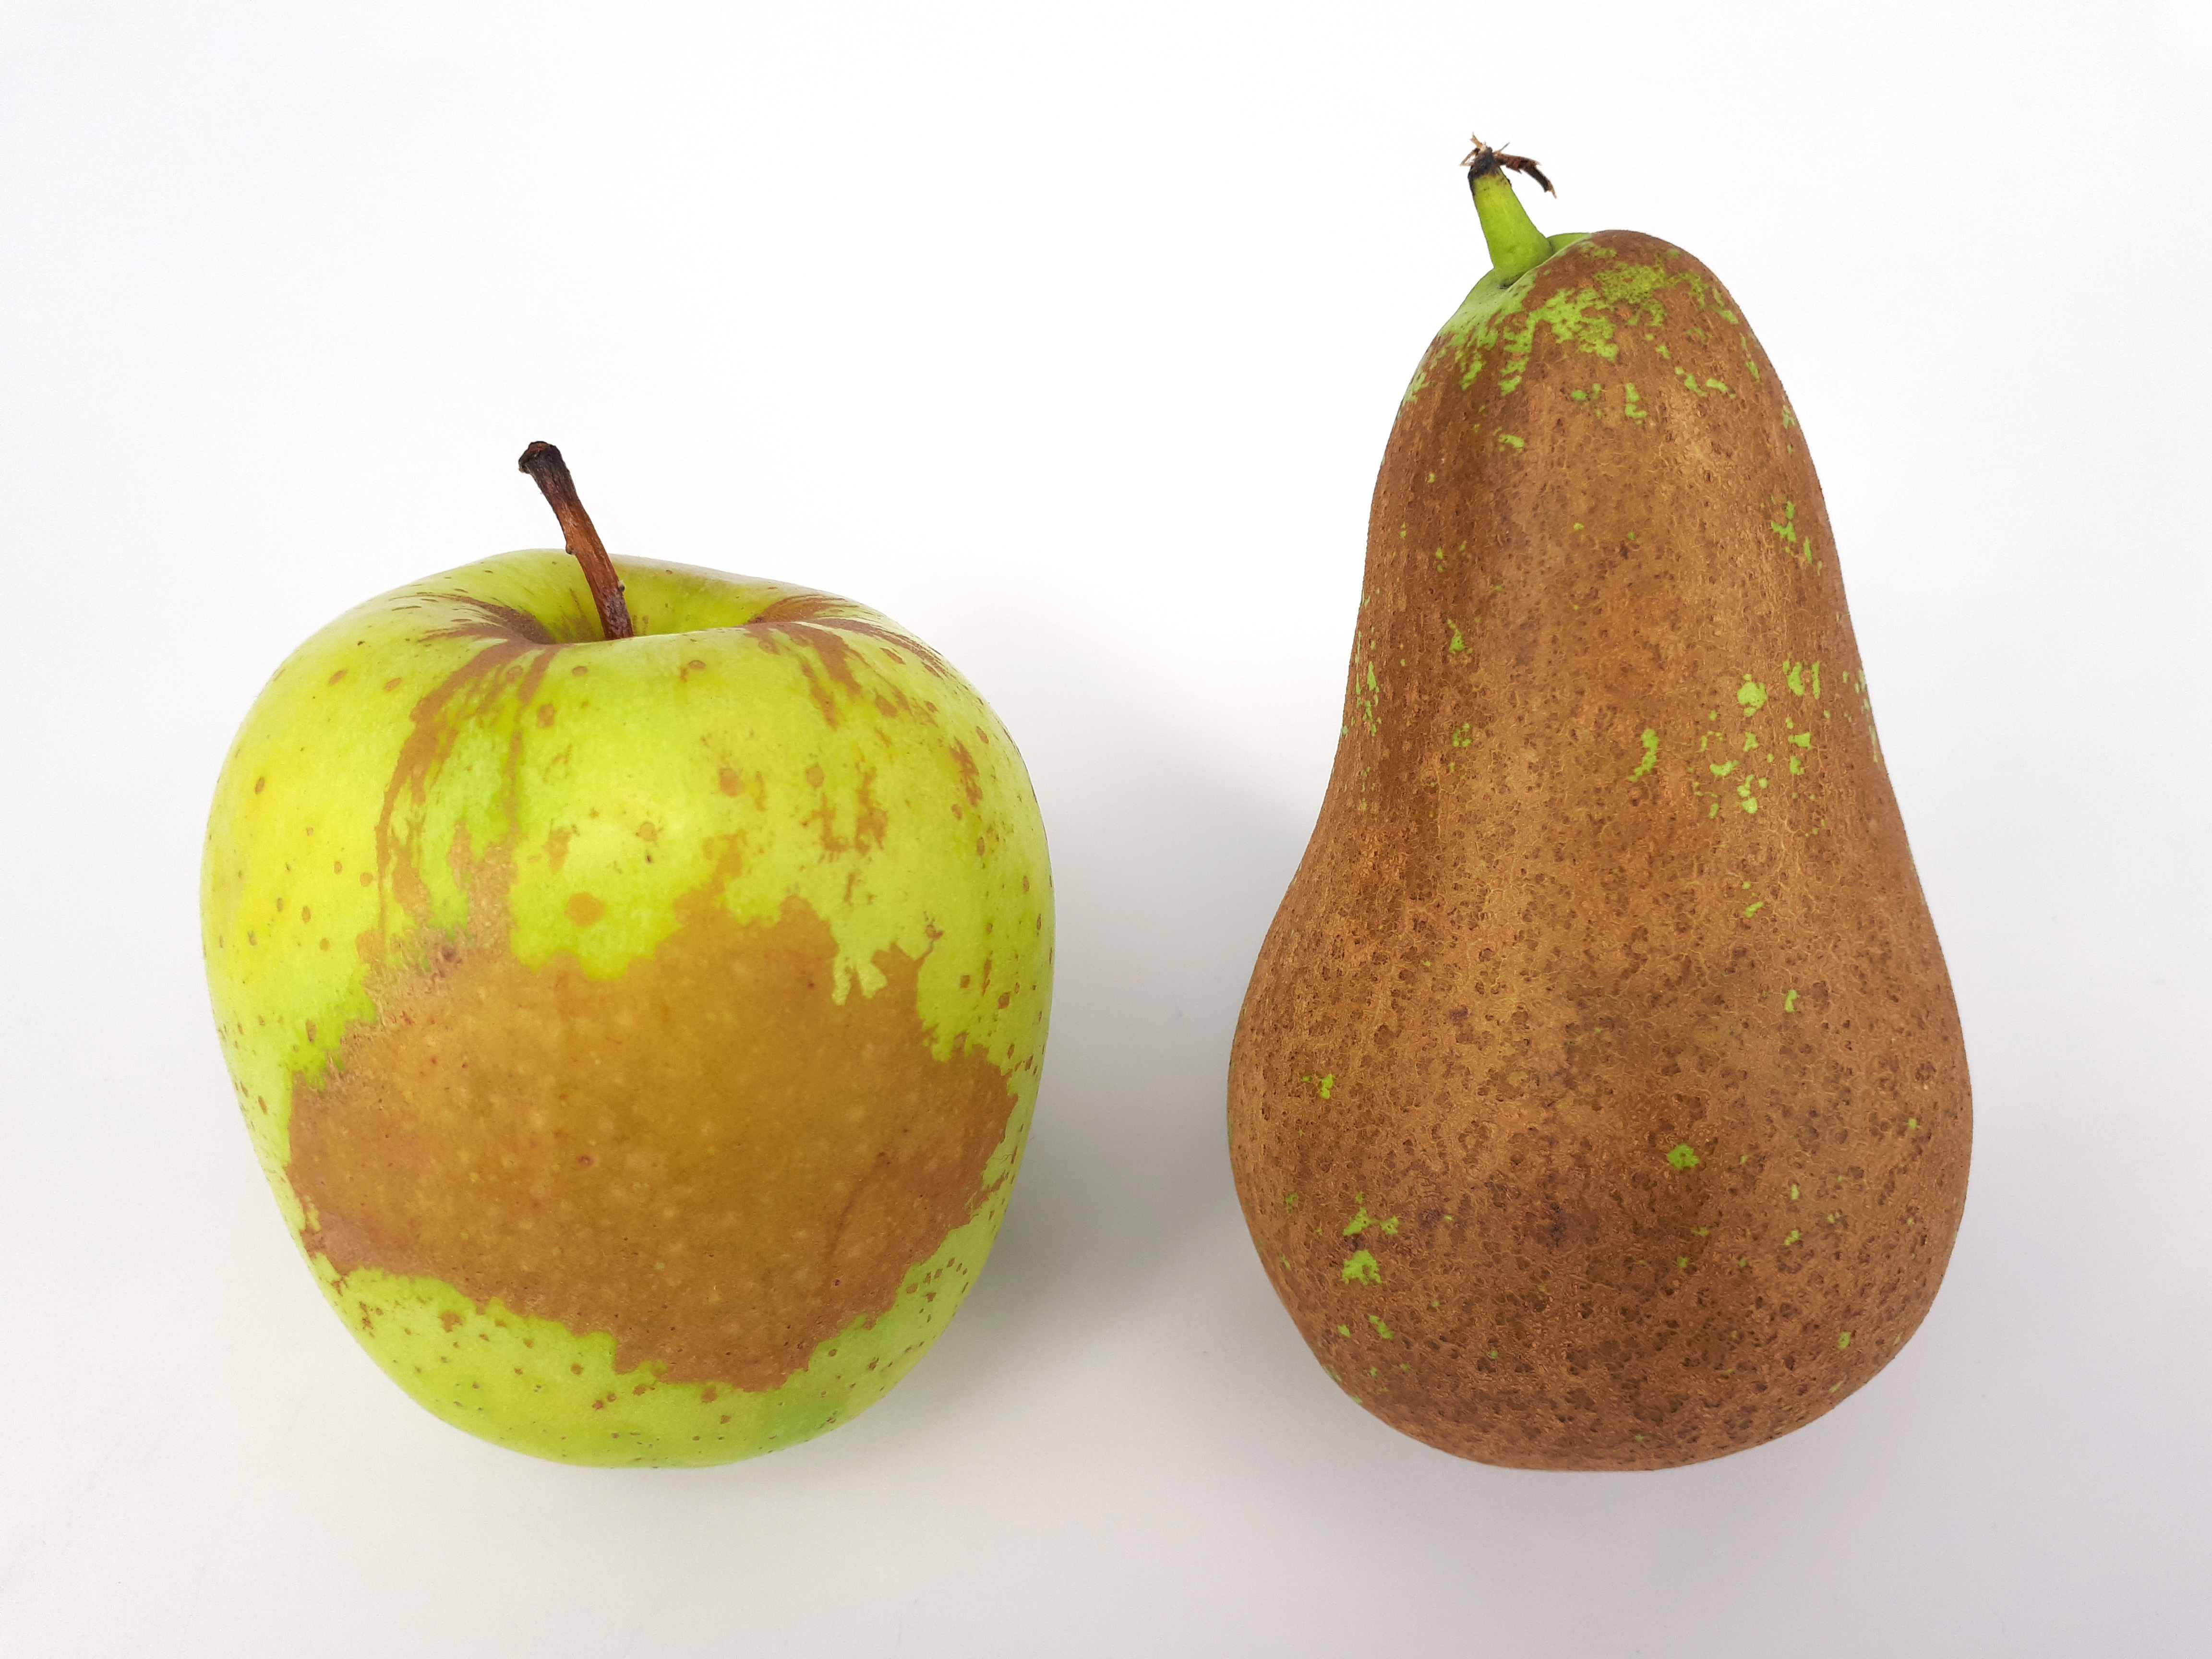 2 x Russetted fruit - Apple - Pear - 2017 C1